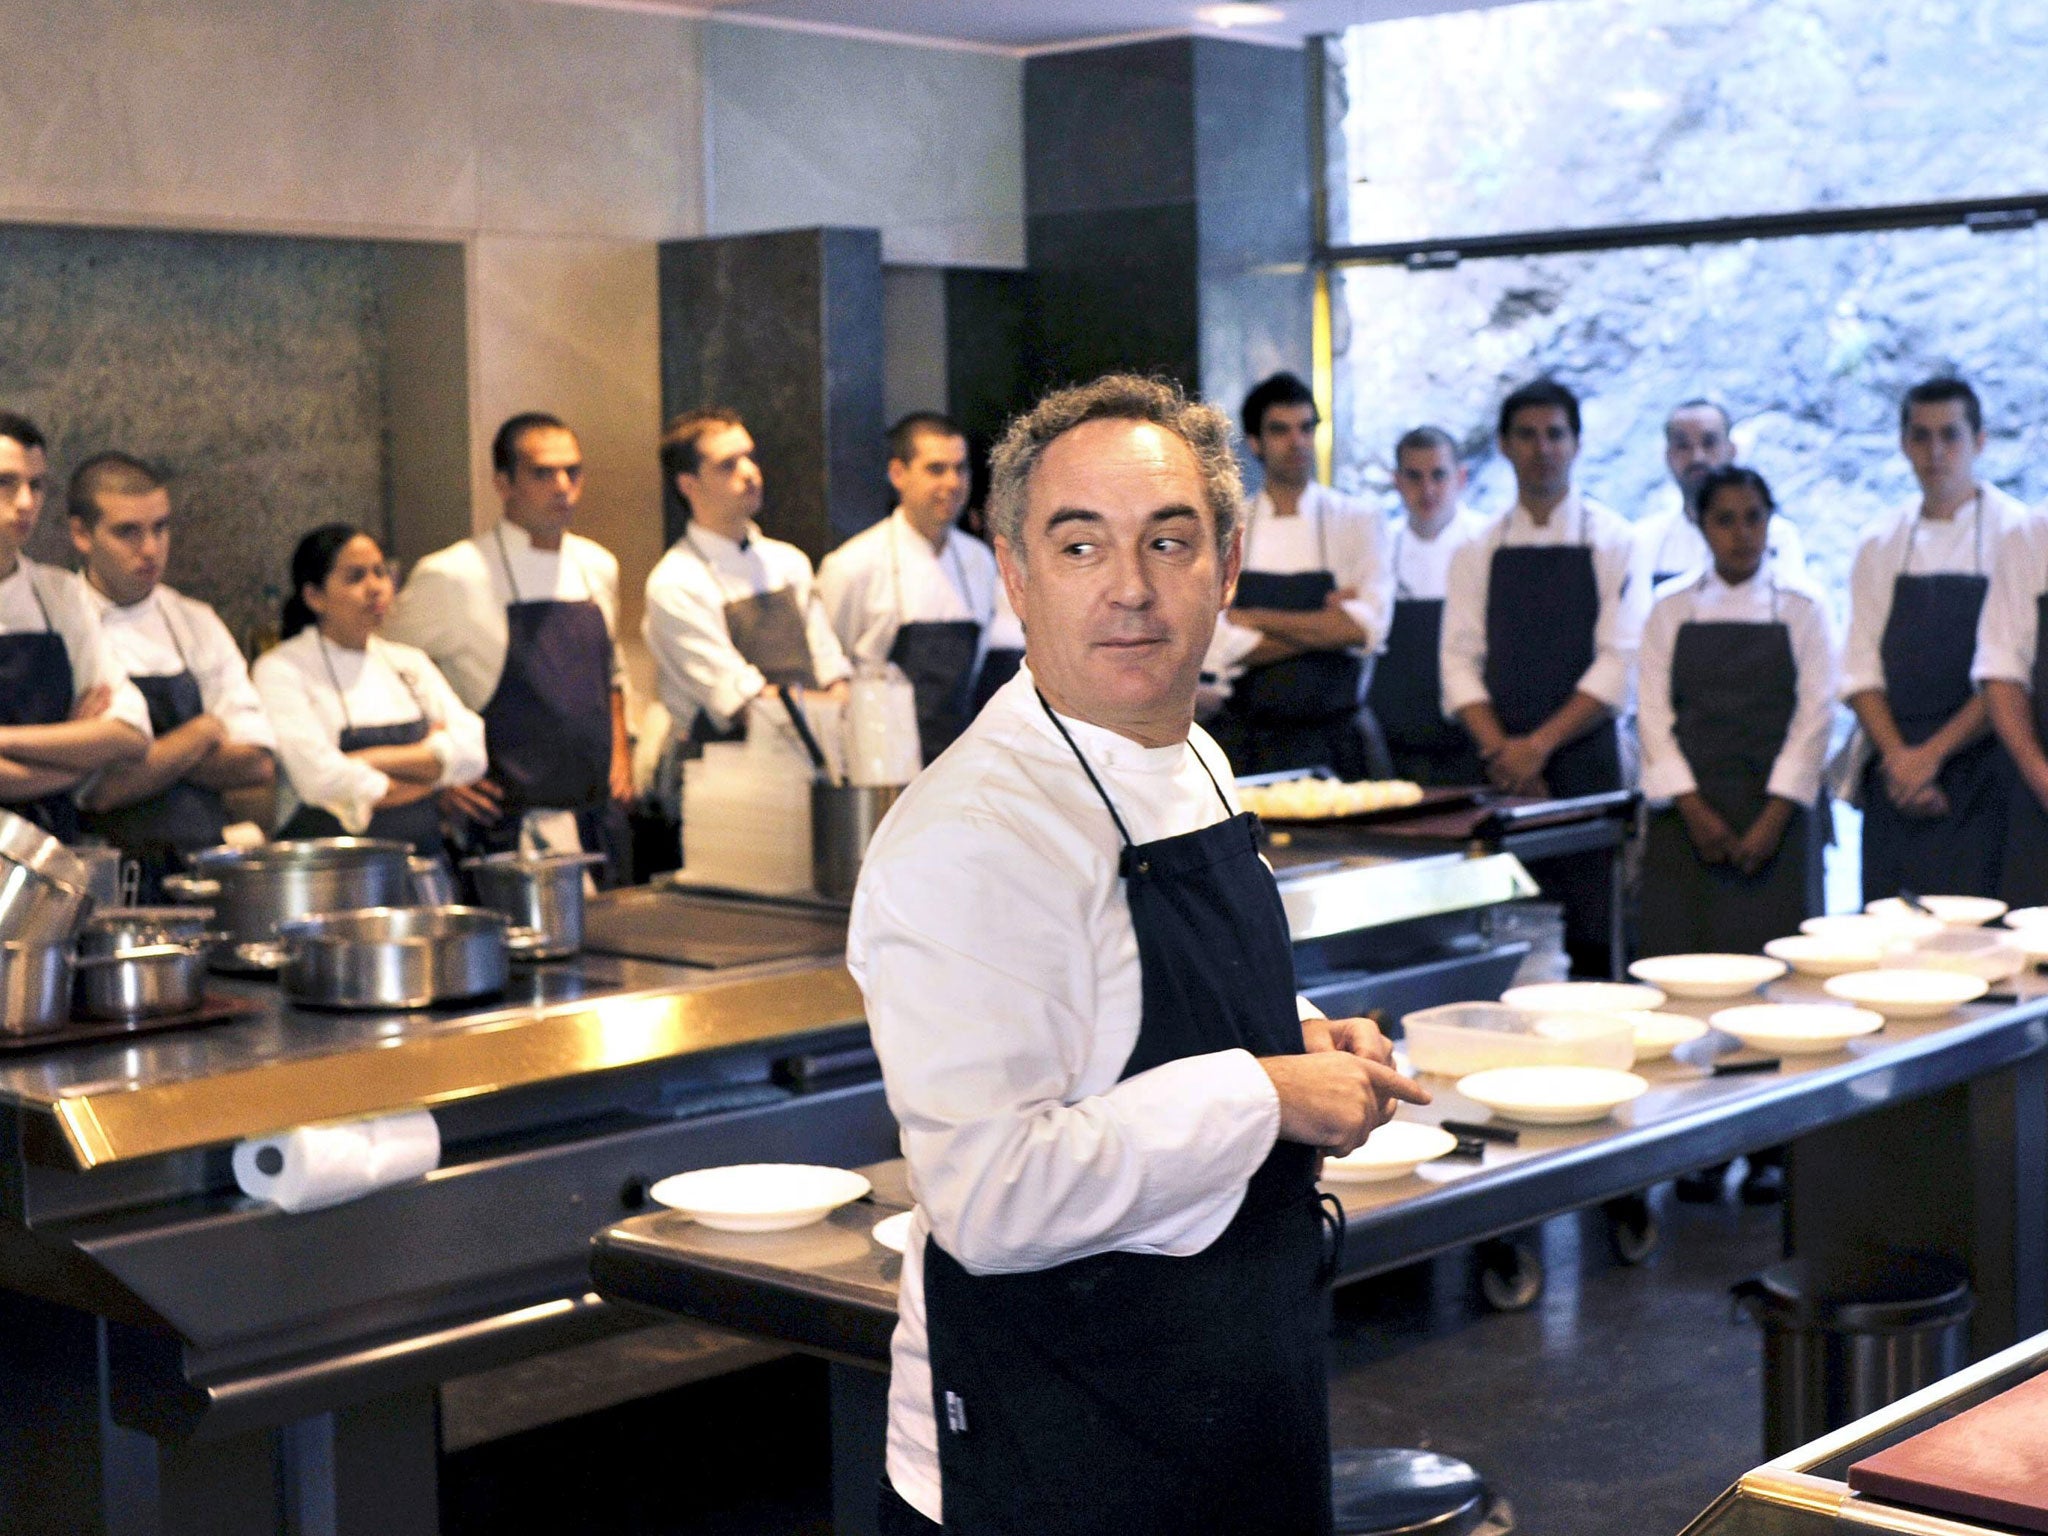 Spanish chef Ferran Adria and his team in the kitchen of the elBulli restaurant in Roses, Catalonia, in 2010